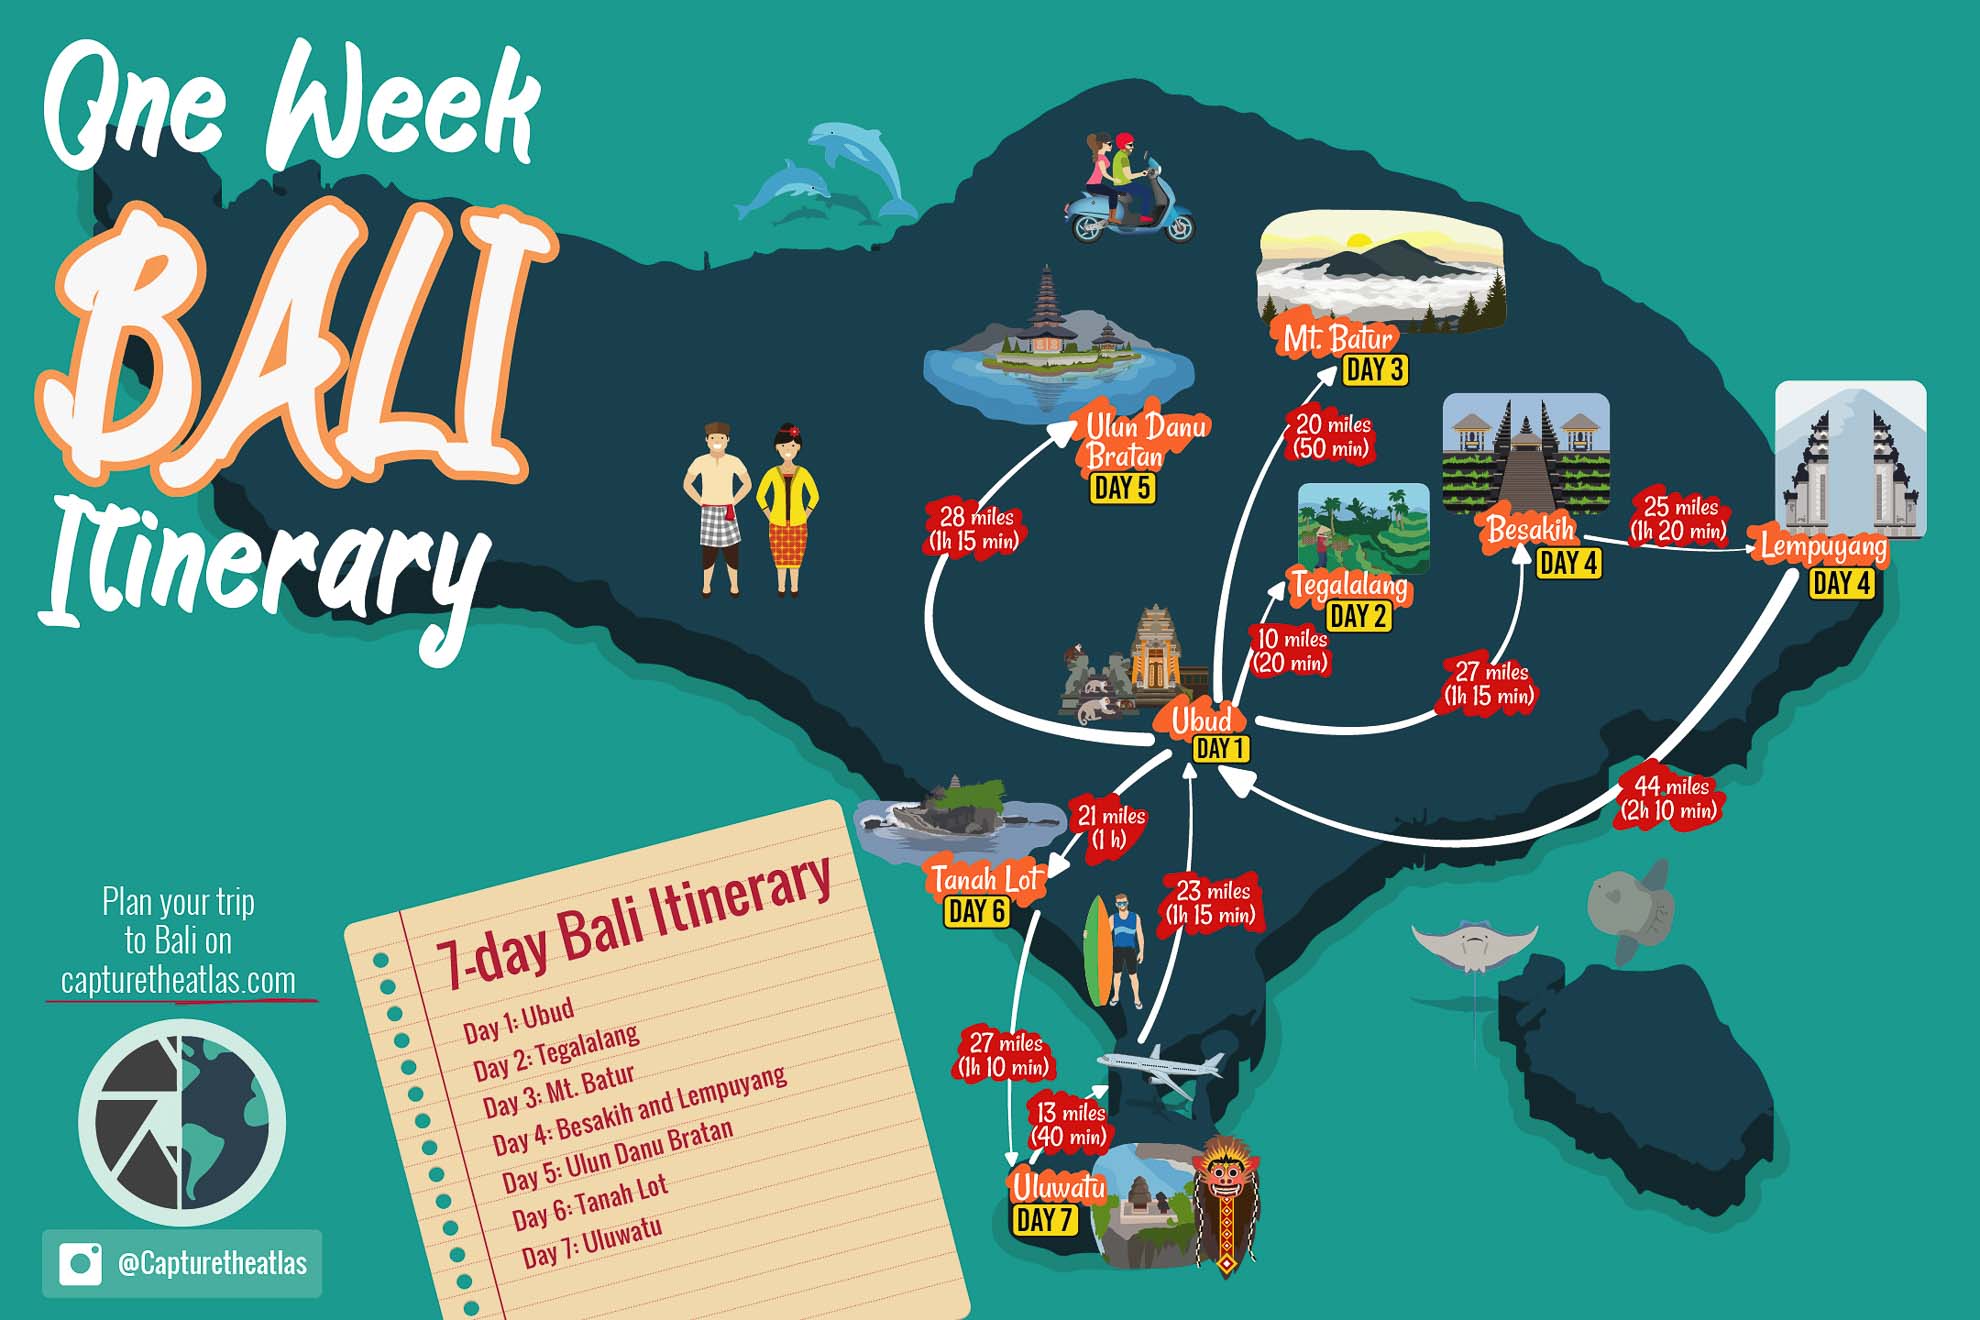 Bali 7-day itinerary - The perfect plan to spend one week in Bali